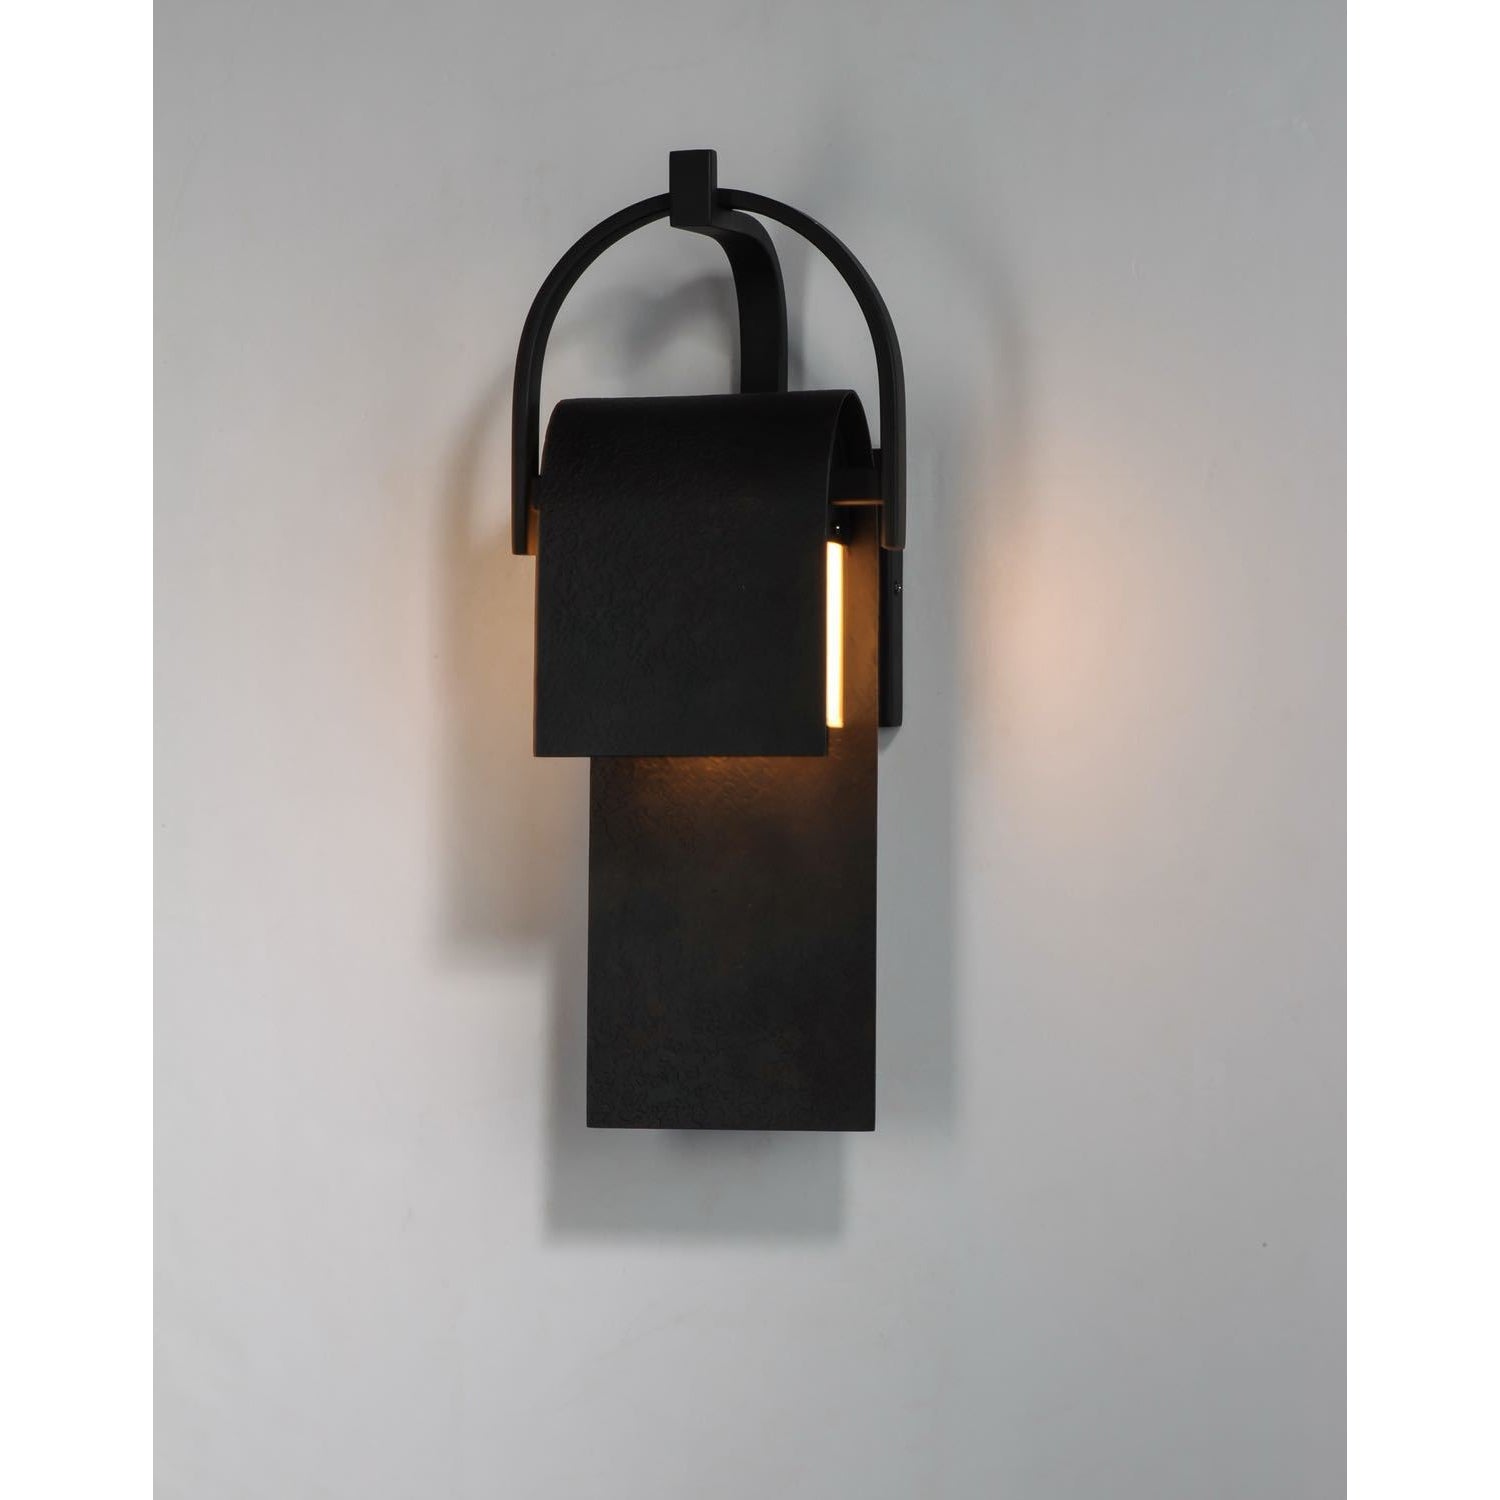 Laredo Outdoor Wall Light Rustic Forge